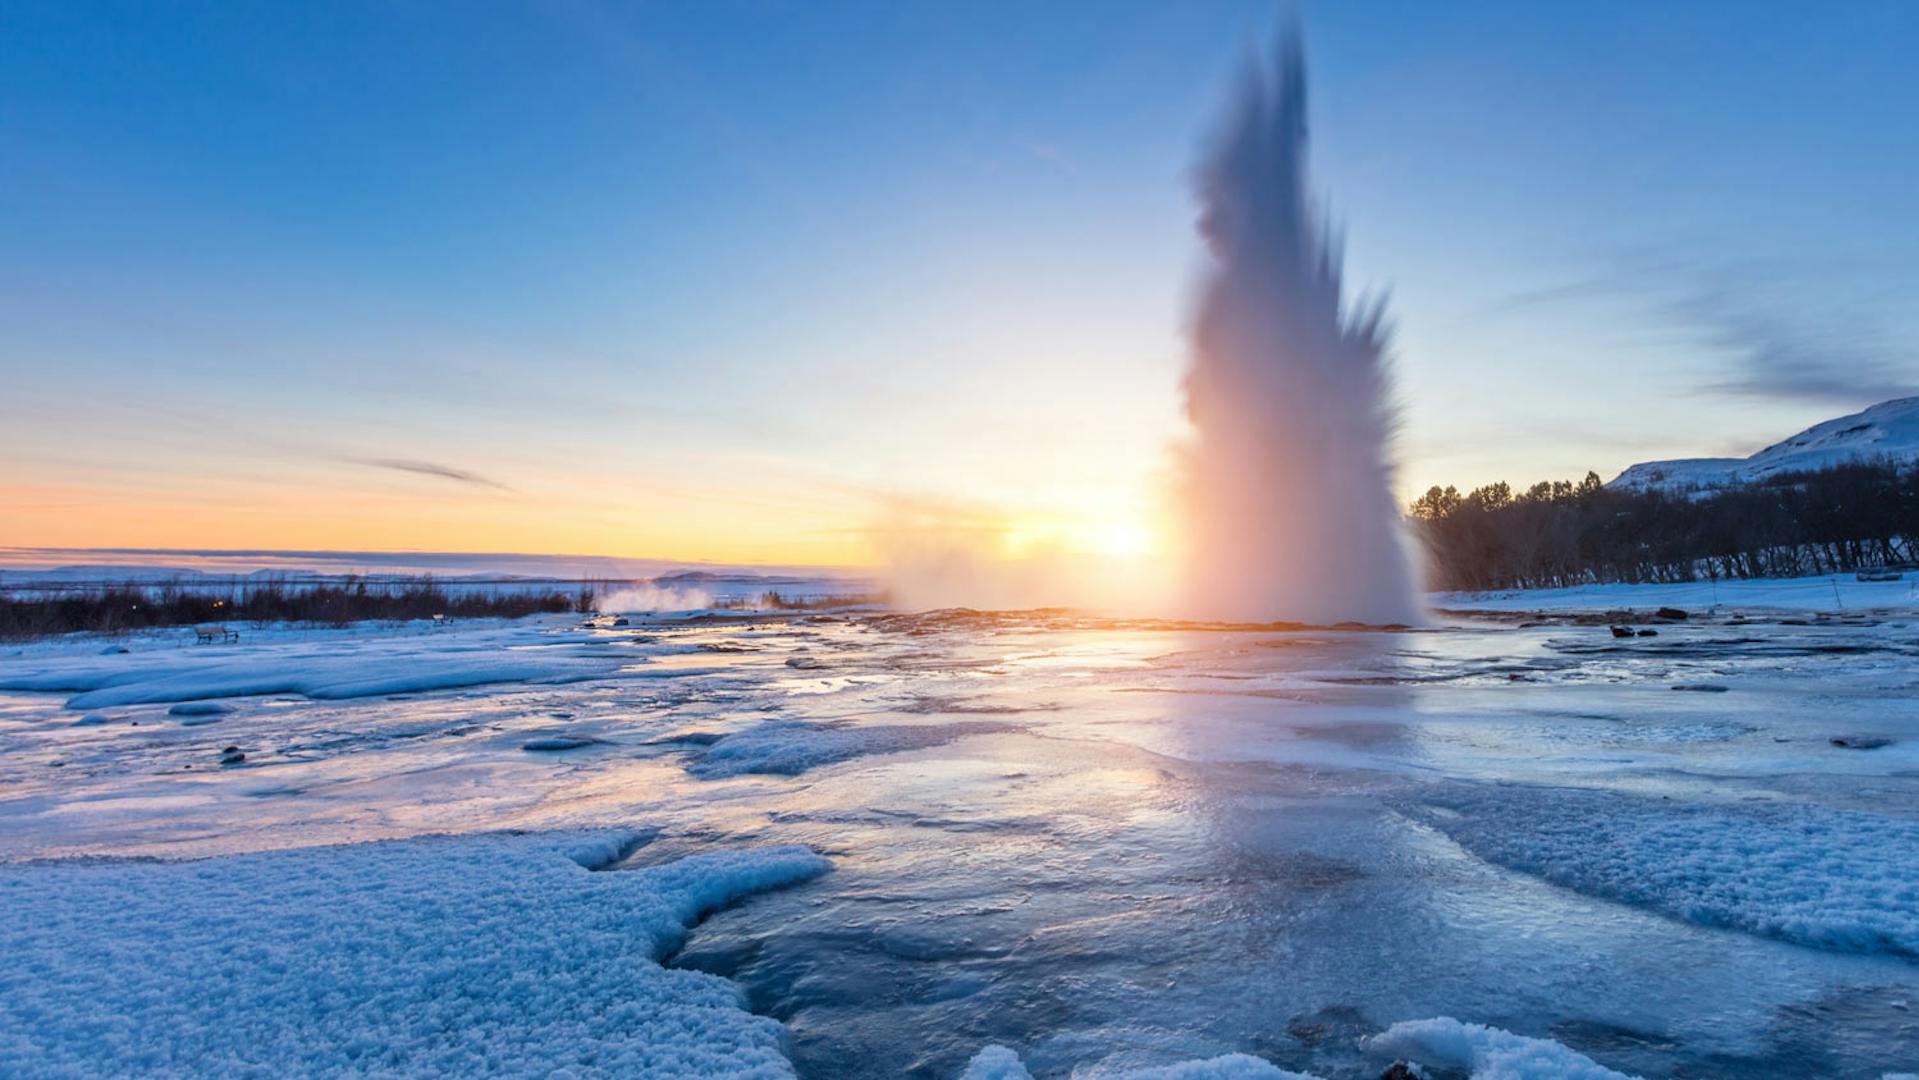 Geysir spewing boiling water into the air during sunset, all surroundings are frozen due to low temperatures in winter.